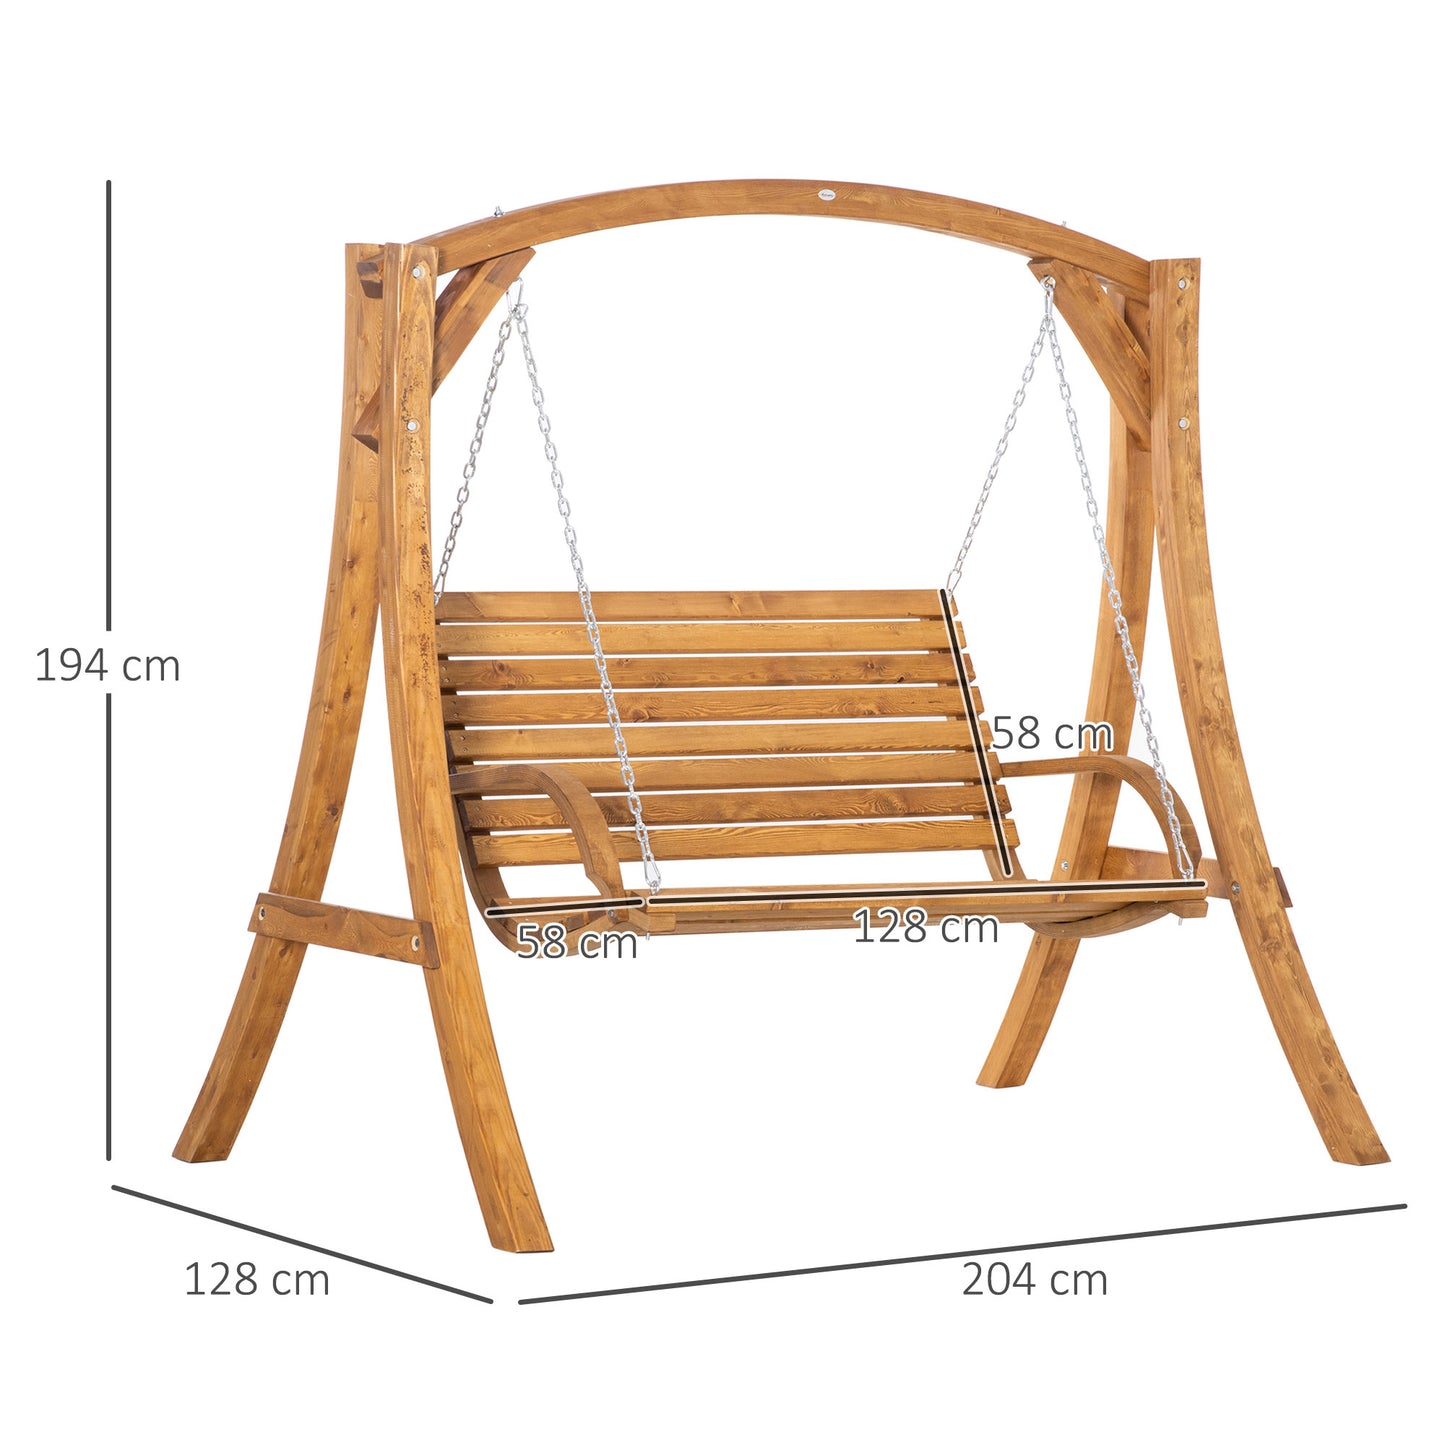 Outsunny 2 Seater Garden Swing Chair, Outdoor Wooden Swing Bench Seat